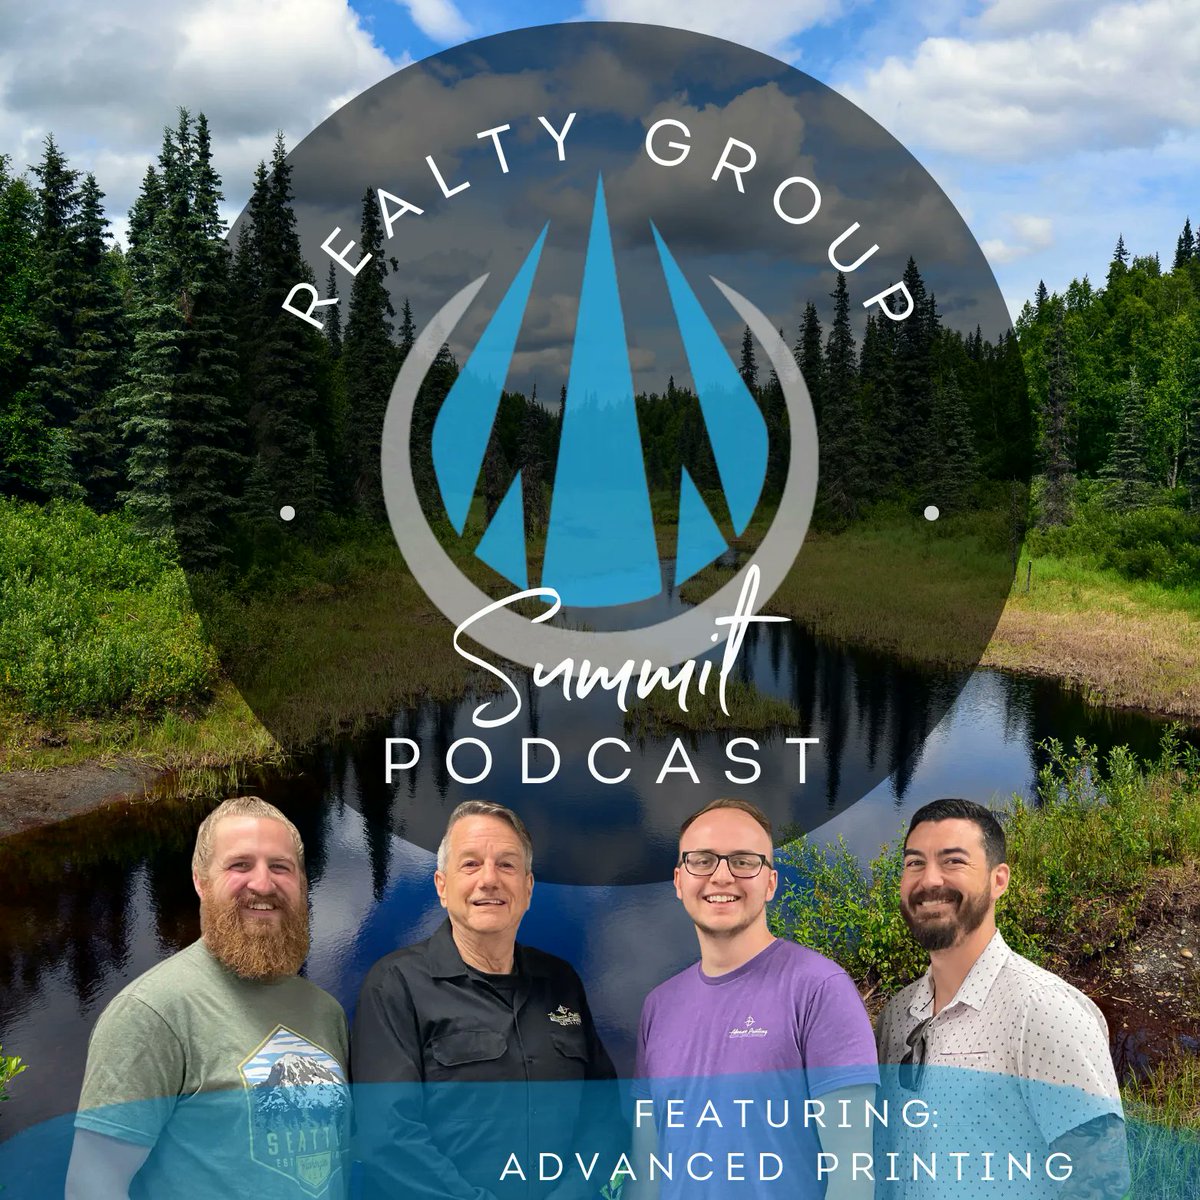 Advance Printing | Entrepreneurial Journeys: From Startup to Succession 

buff.ly/44cIqgJ

#SummitRealtyGroupPodcast #TheHungryRobot #SupportLocal #fairbankspodcast #alaskapodcast #realestatepodcast #alaskanrealestate #fairbanksrealestate #localbusiness